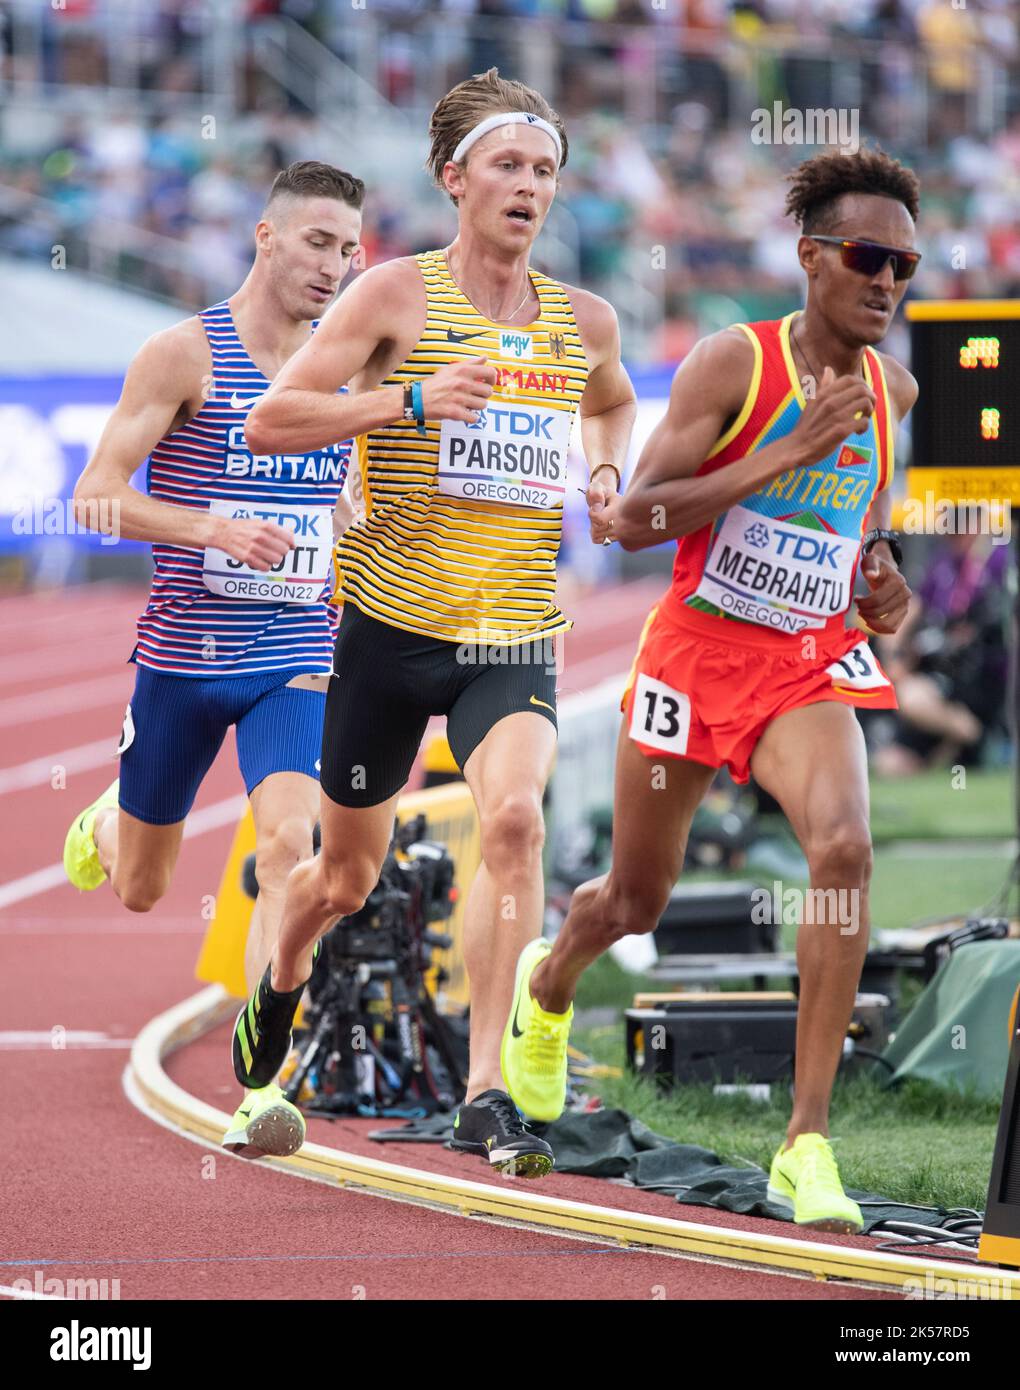 Sam Parsons and Merhawi Mebrahtu competing in the men’s 5000m heats at the World Athletics Championships, Hayward Field, Eugene, Oregon USA on the 21s Stock Photo